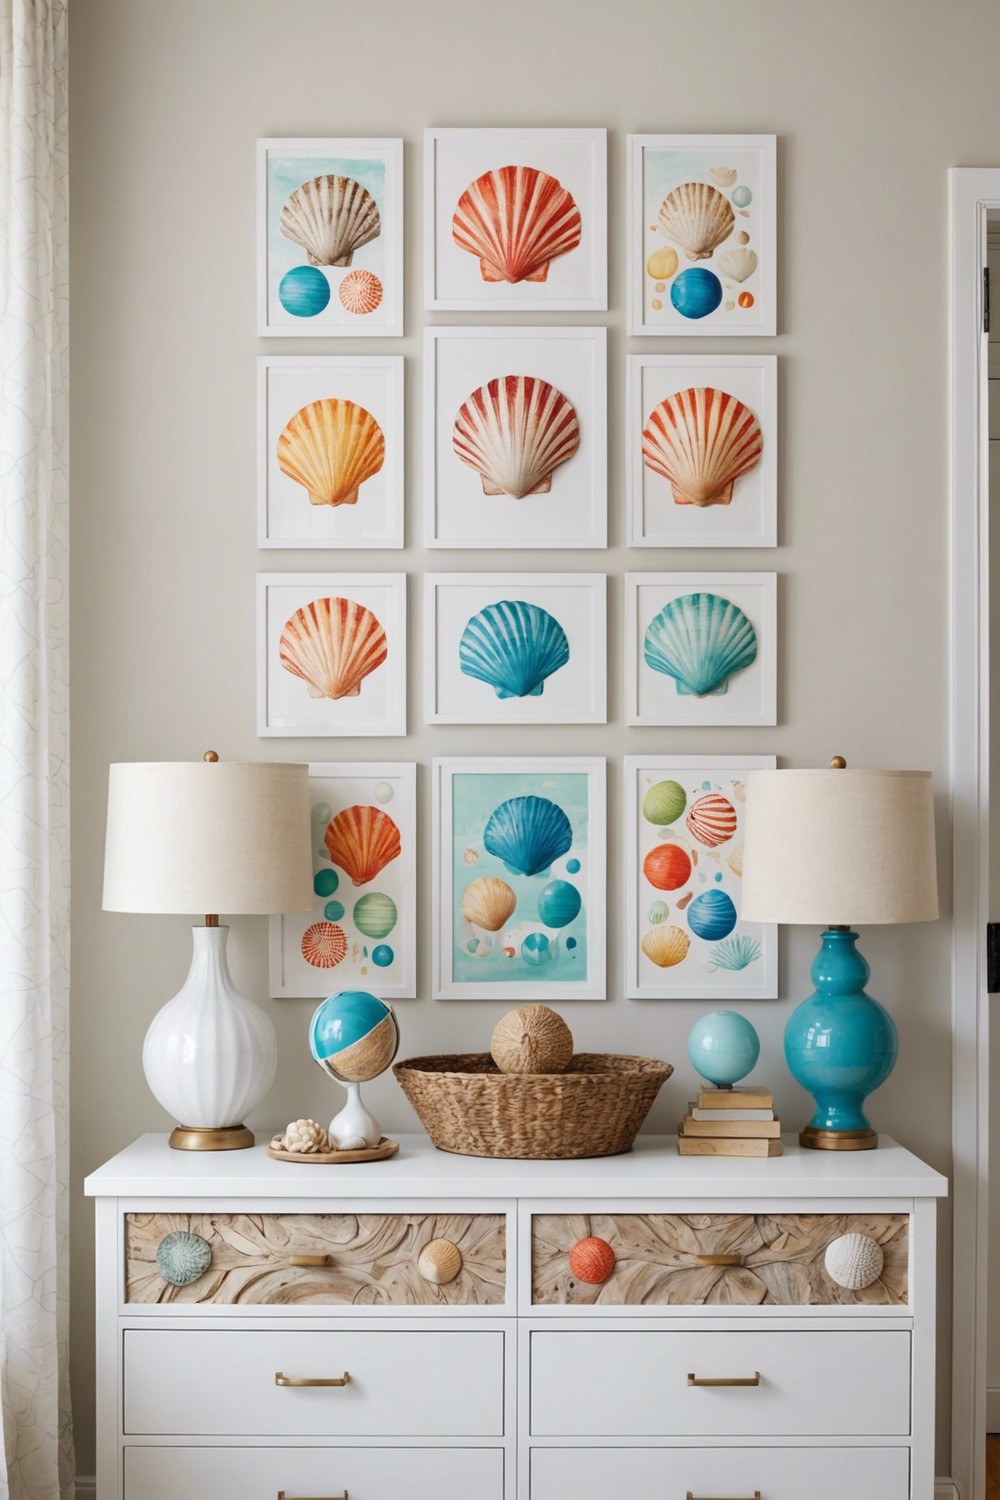 Add a Touch of Whimsy with a Summer-Themed Wall Art